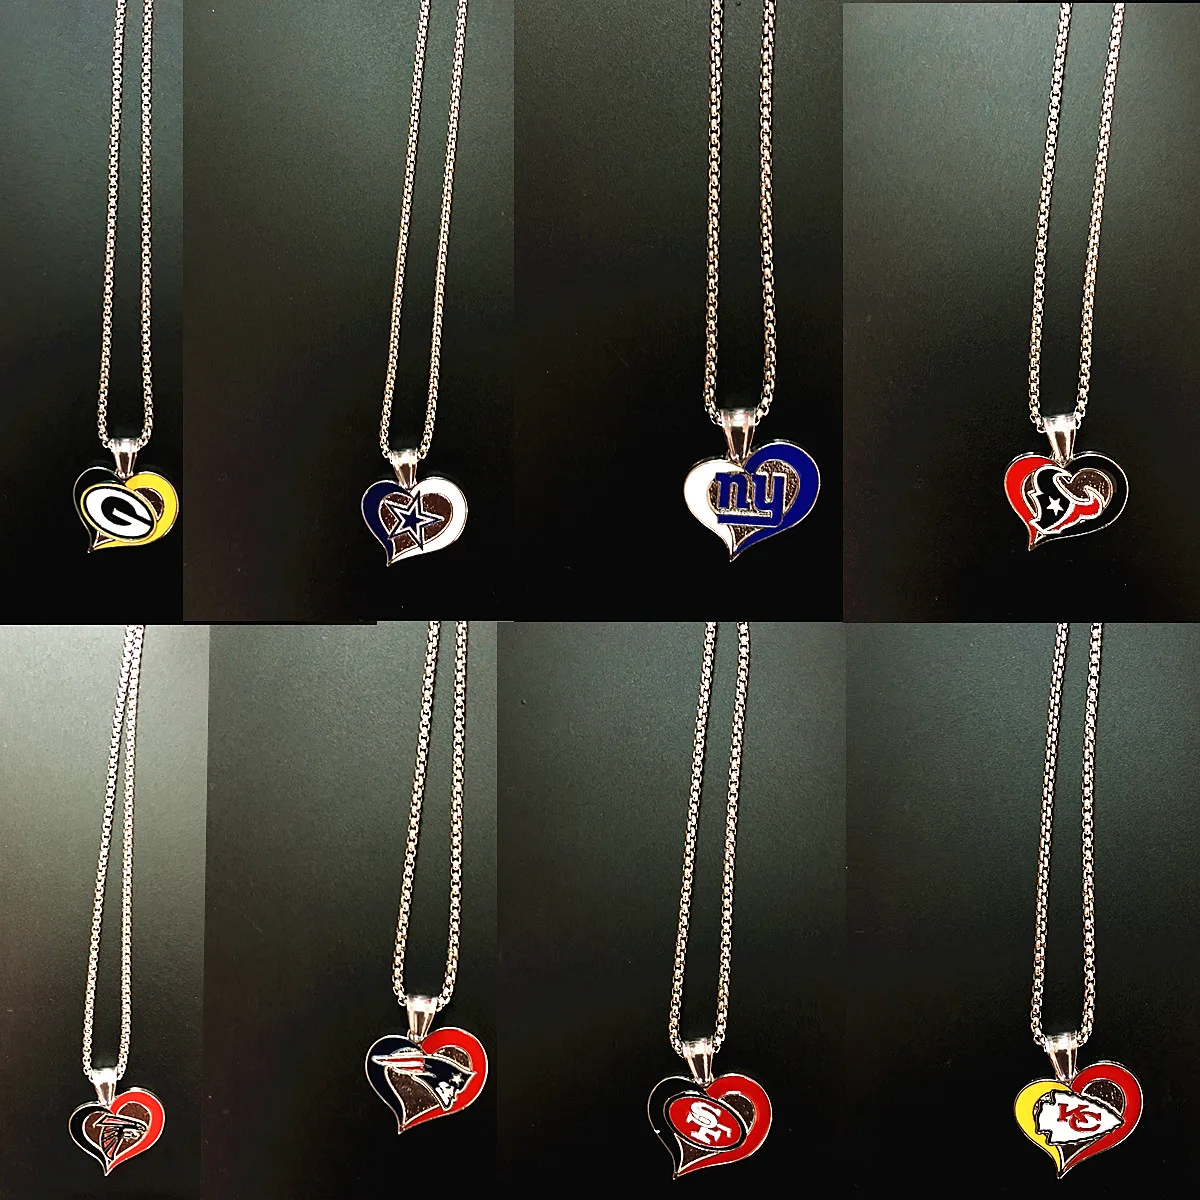 Outdoor Football Team Rugby Heart Shape Slide Necklace Pendant Fitness Hiphop Rope Chain Fan Sport Lover Young Man Gift Jewelry